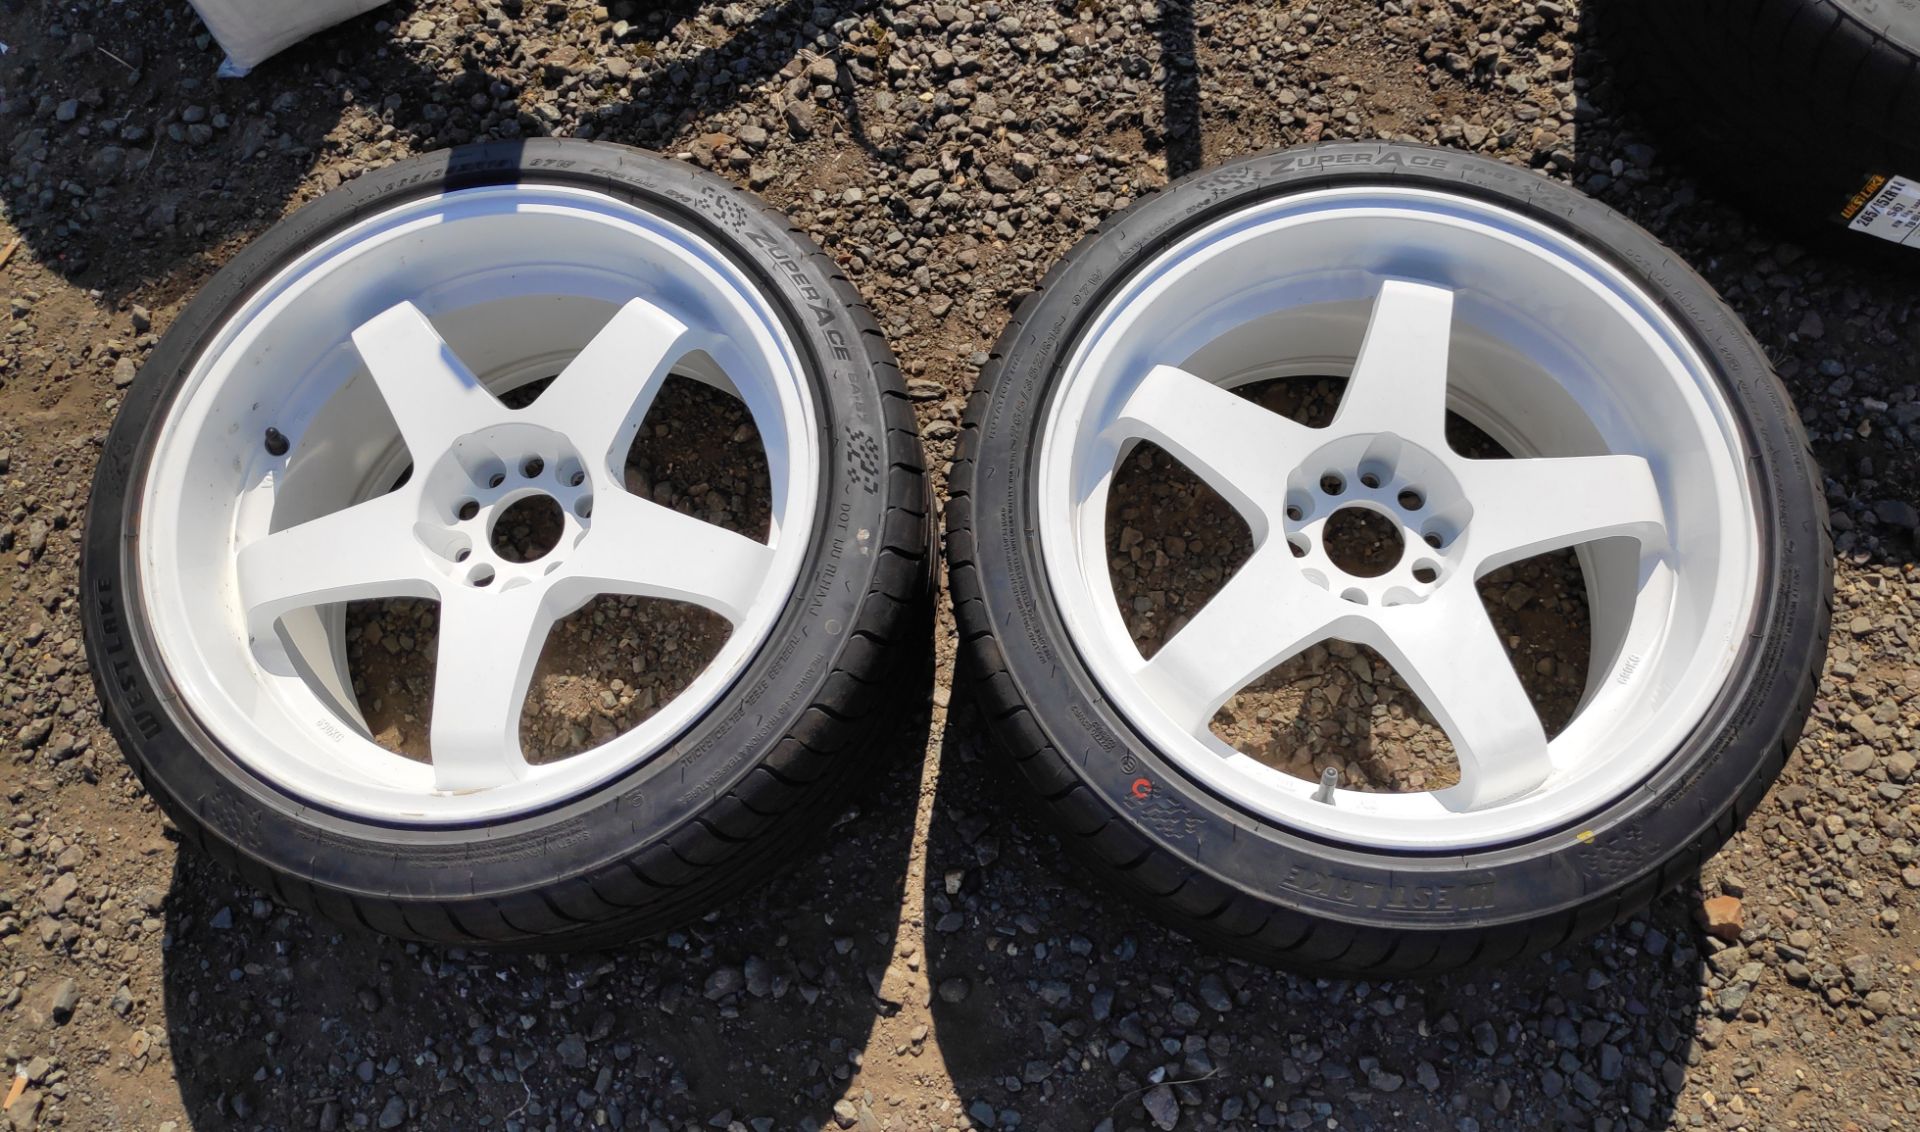 2 x White 5-Spoke 18 x 10 ET12 Wheels with 265 35 R18 Tyres For Nissan 350Z - CL682 - Location: Bedf